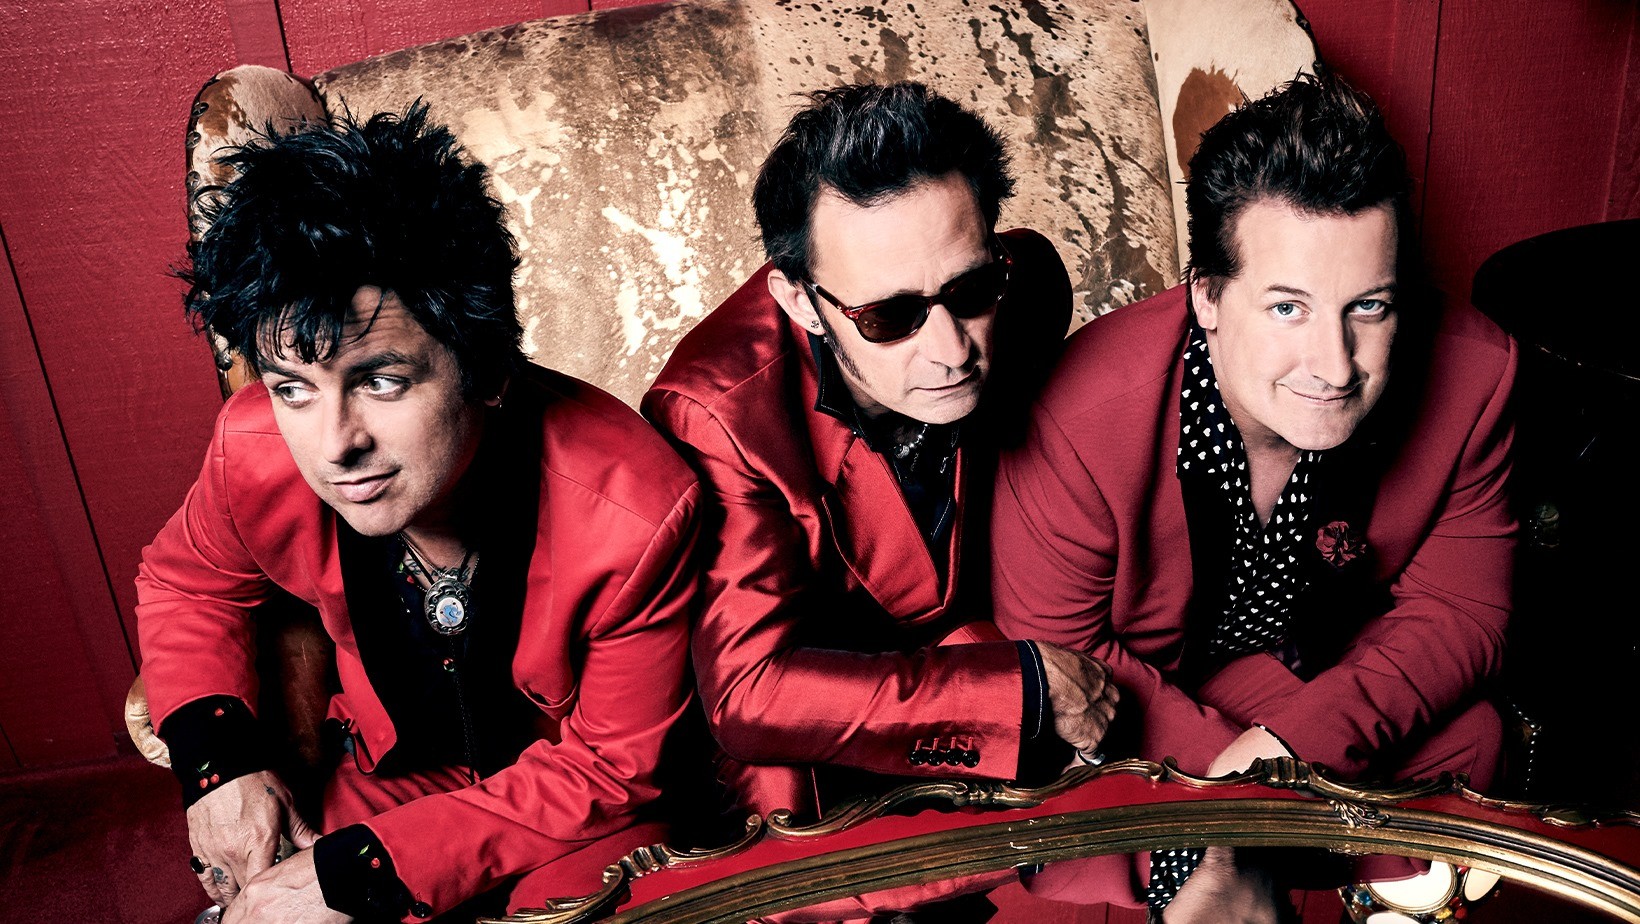 Green Day have cancelled the Asian dates on their world tour due to the coronavirus outbreak.